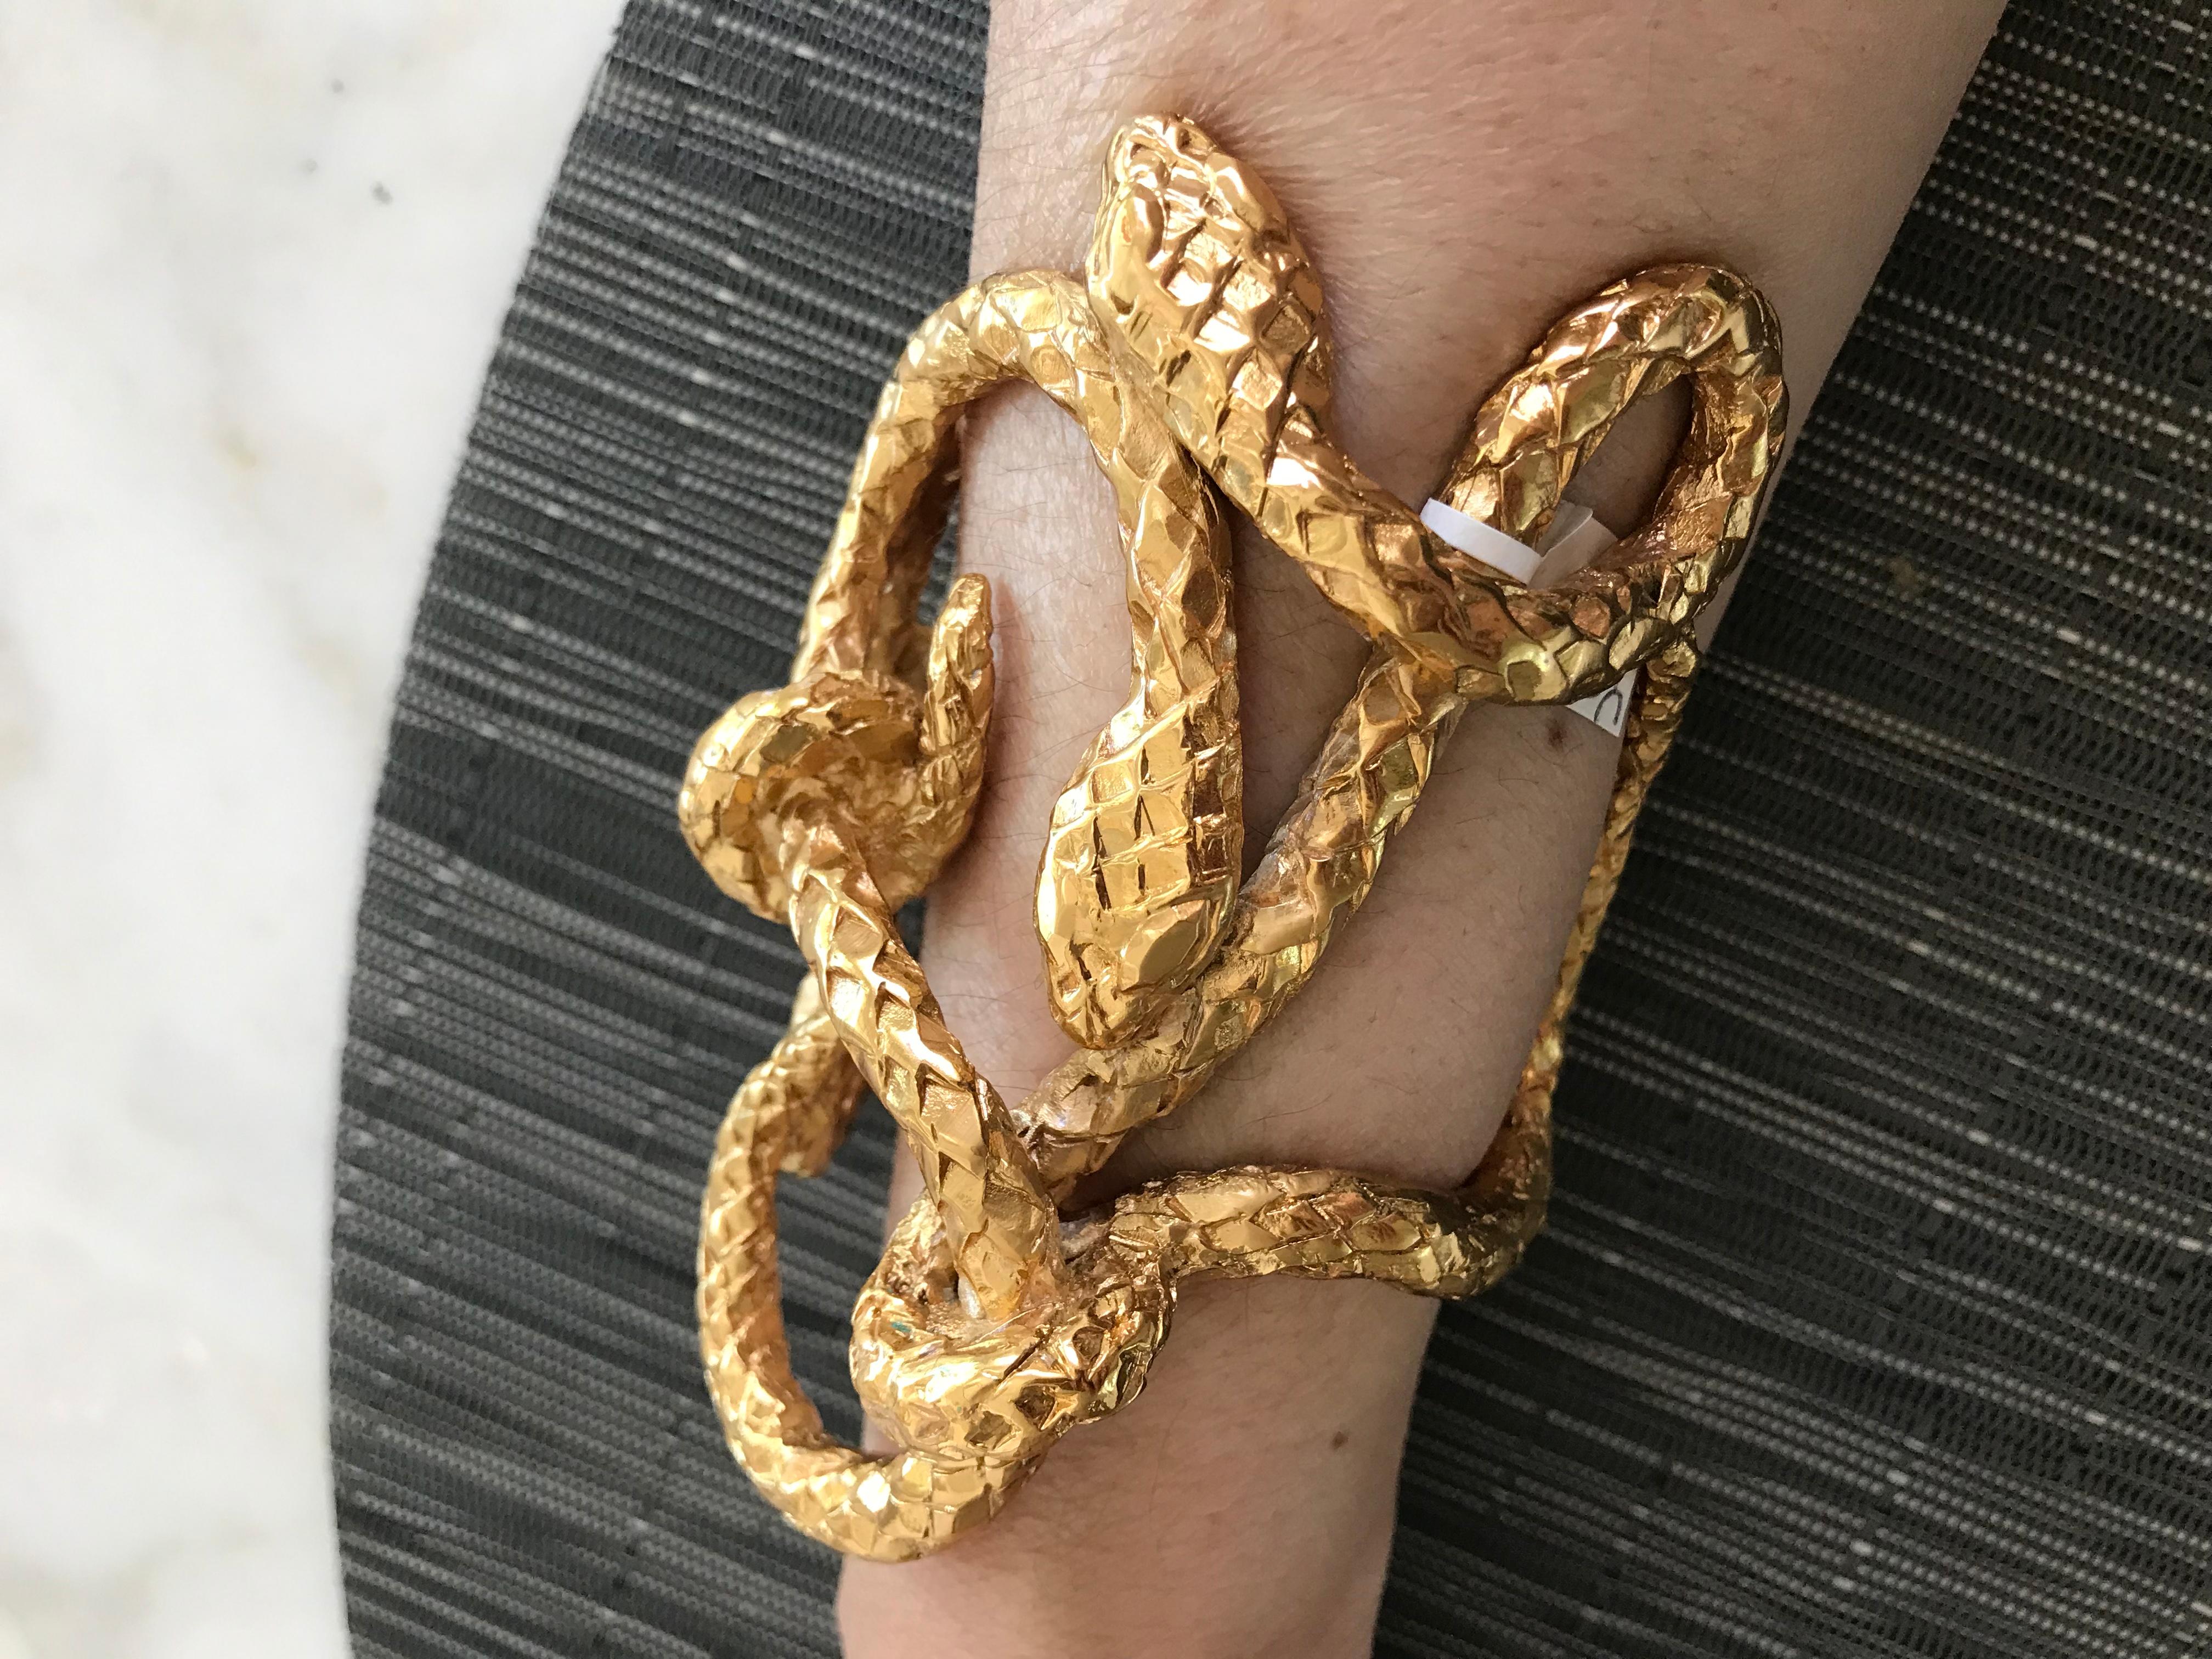 Dramatic and rare vintage YSL Gold plated large cuff bracelet.
**YSL Necklace sold separately and available for purchase at our 1stdibs store